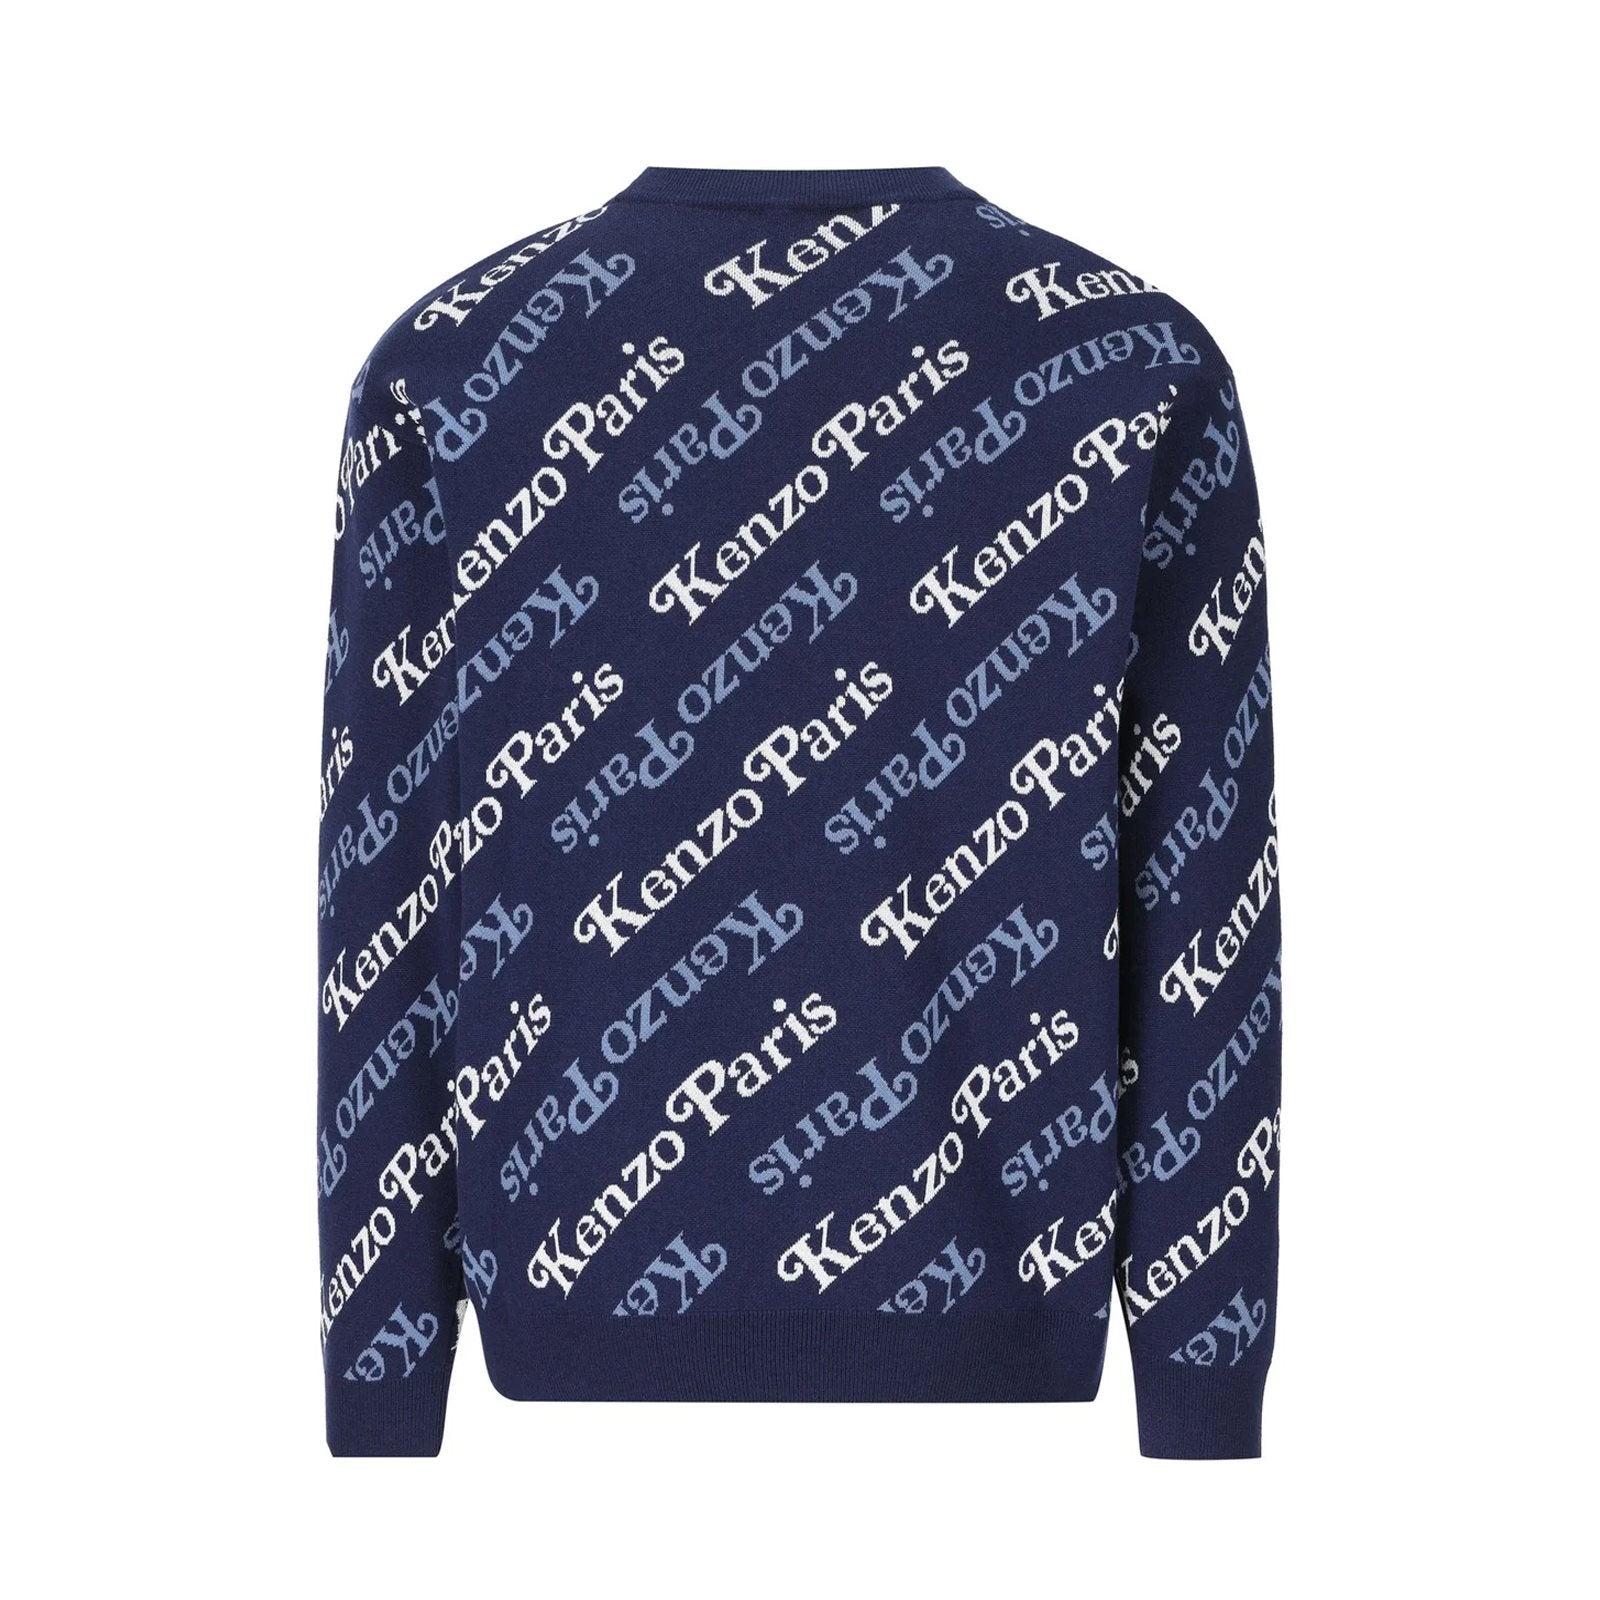 By Verdy knitted jumper